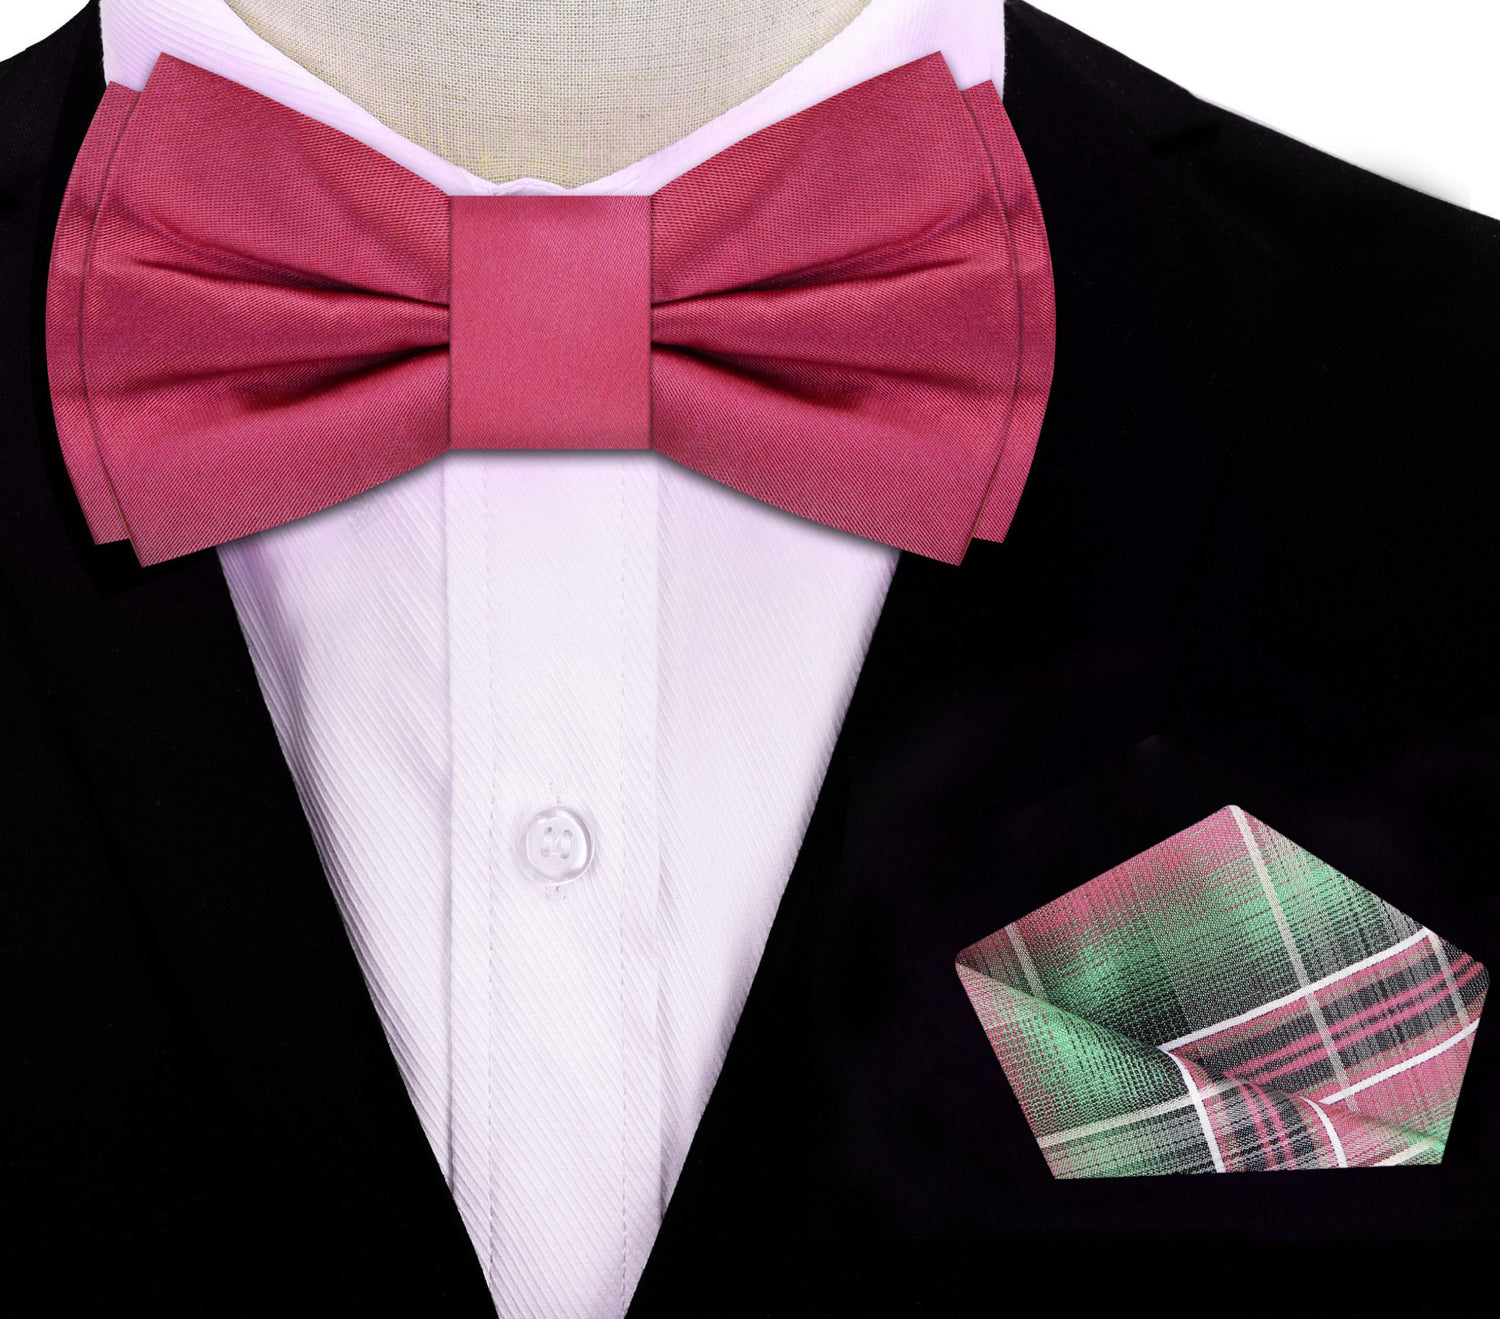 Raspberry Bow Tie with Green and Raspberry Plaid Pocket Square on Suit